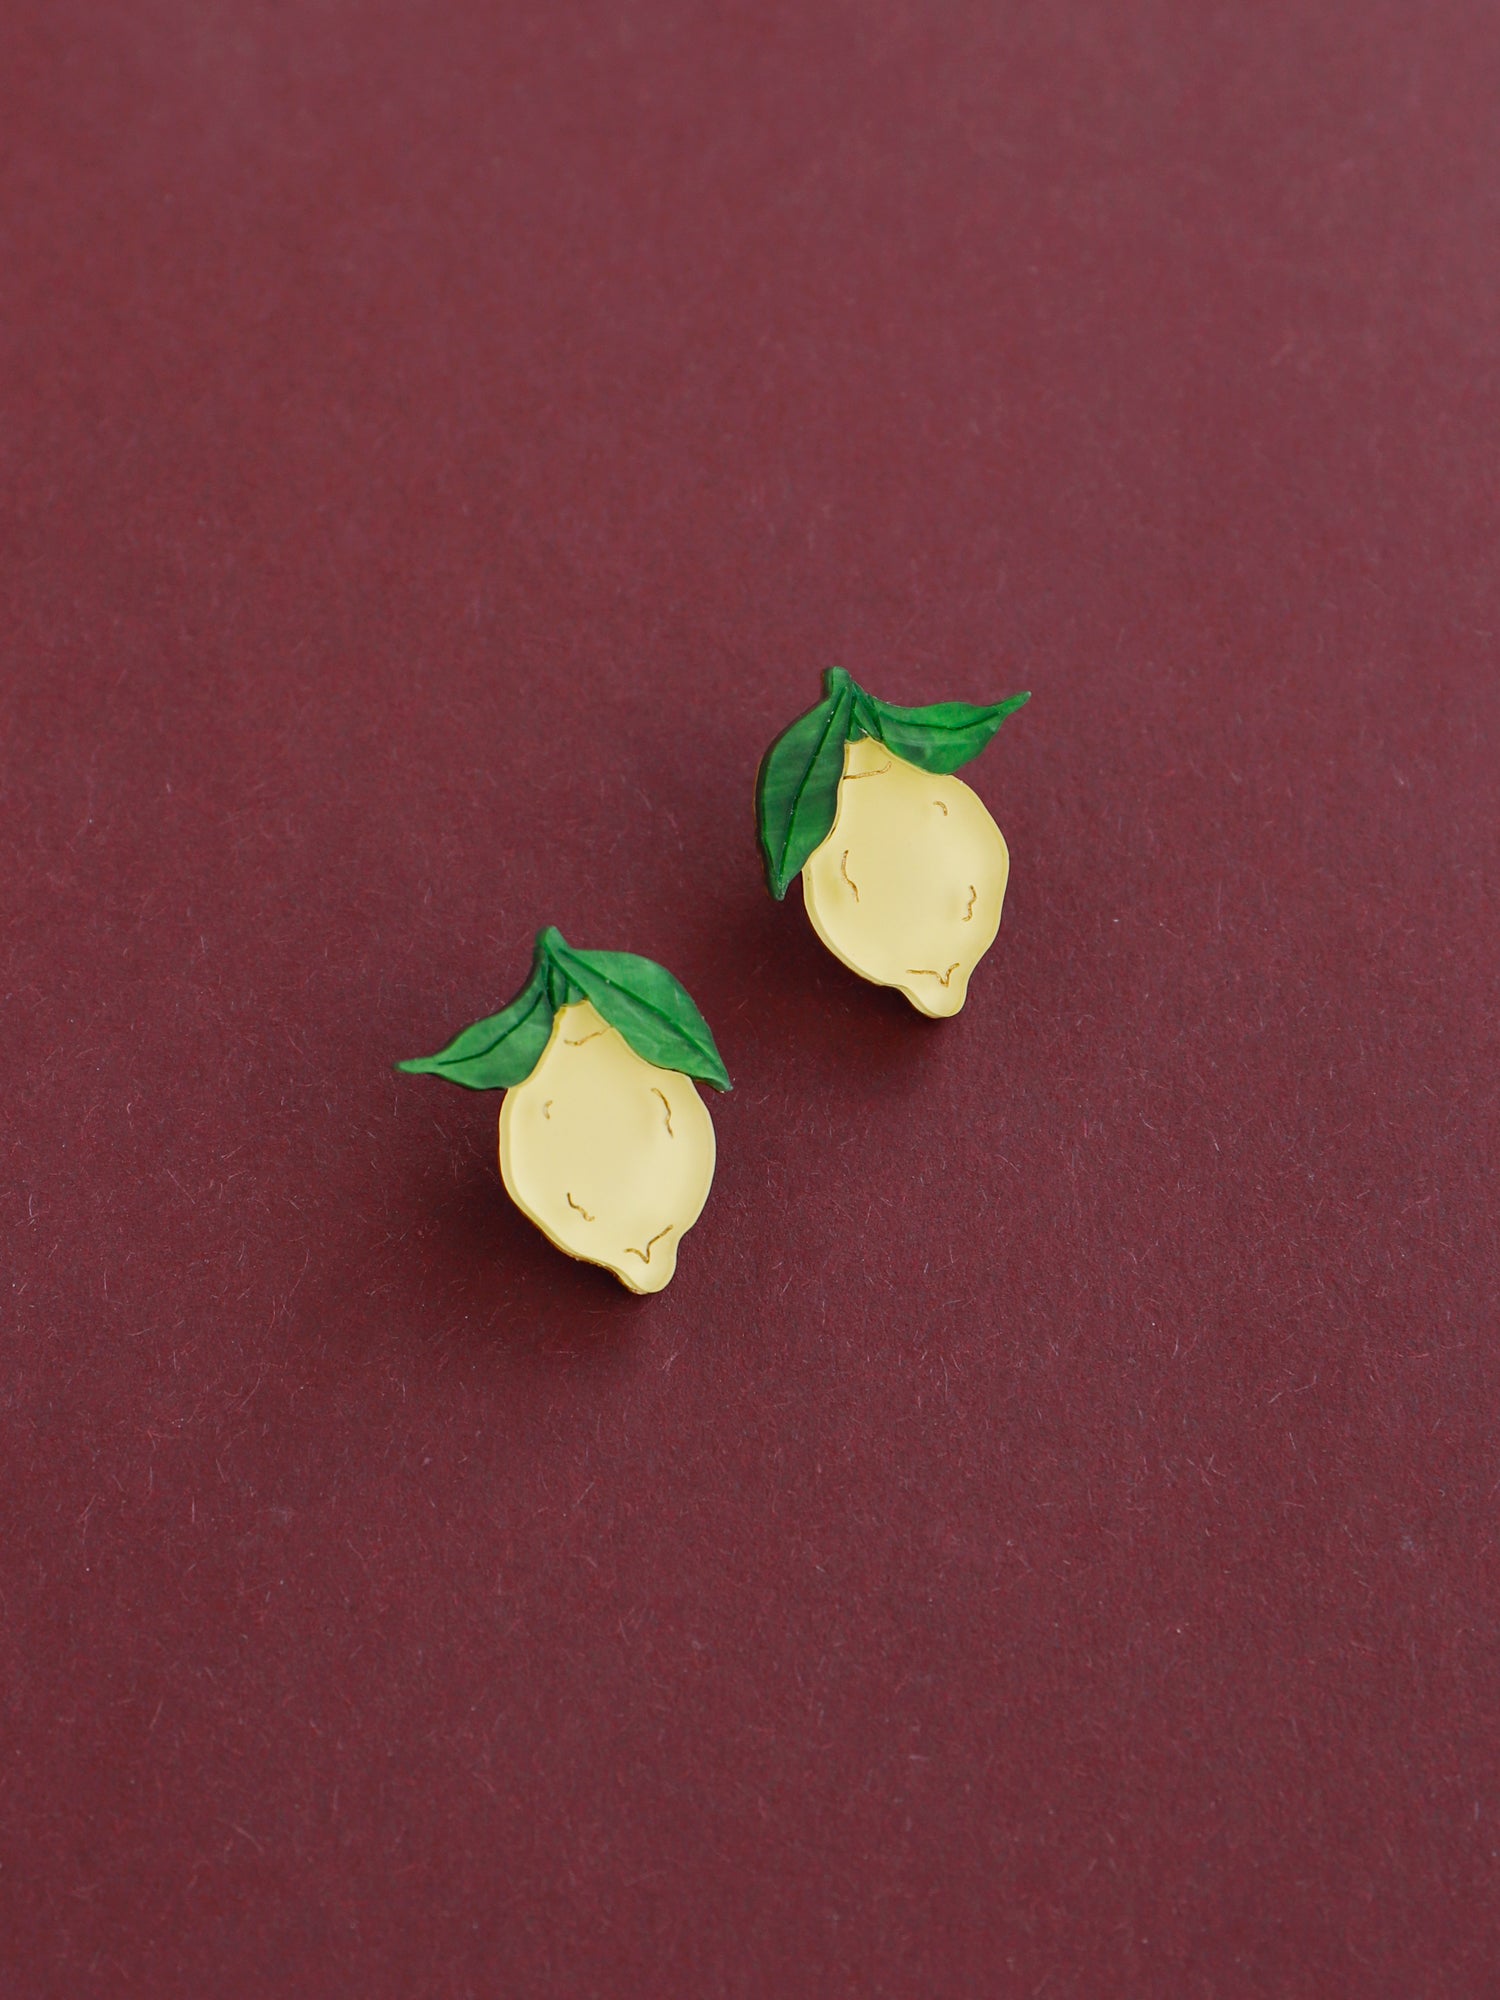 Lemon studs made with wood, 64% recycled acrylic and hand-inked details with sterling silver earring posts & butterflies. Handmade in the UK at Wolf & Moon.